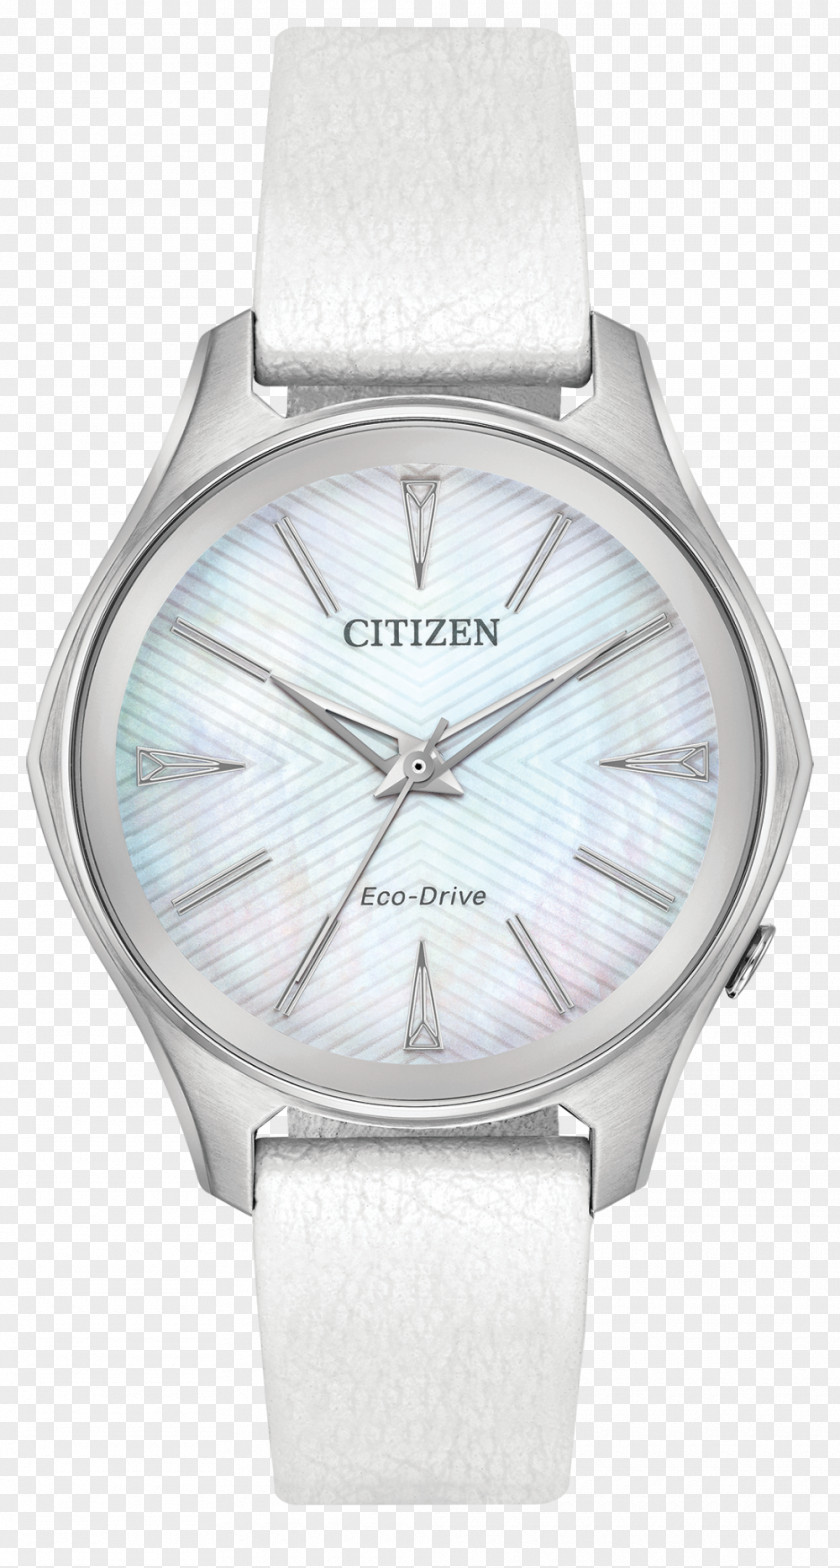 Watch Eco-Drive Citizen Holdings Jewellery Chronograph PNG